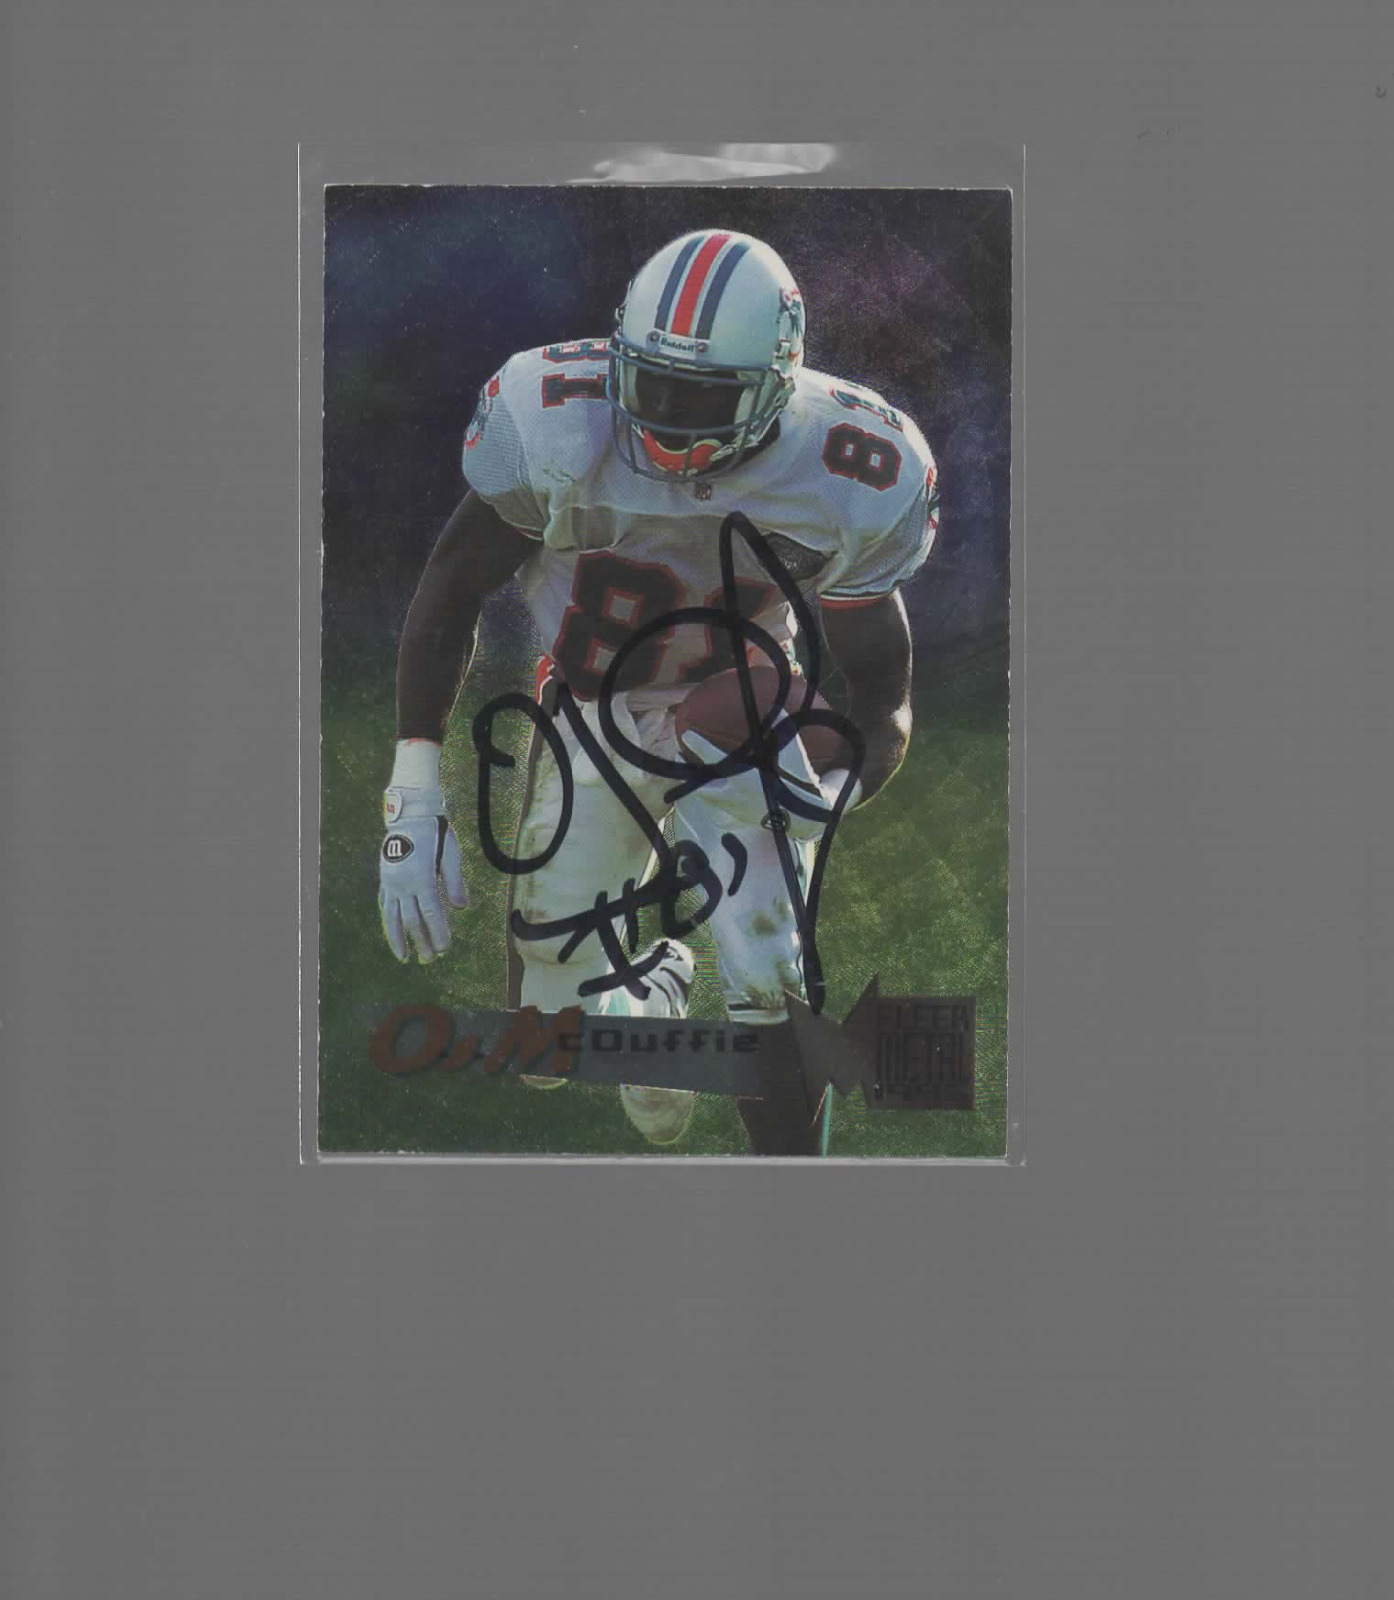 O.J. McDUFFIE MIAMI DOLPHINS AUTOGRAPHED FOOTBALL CARD